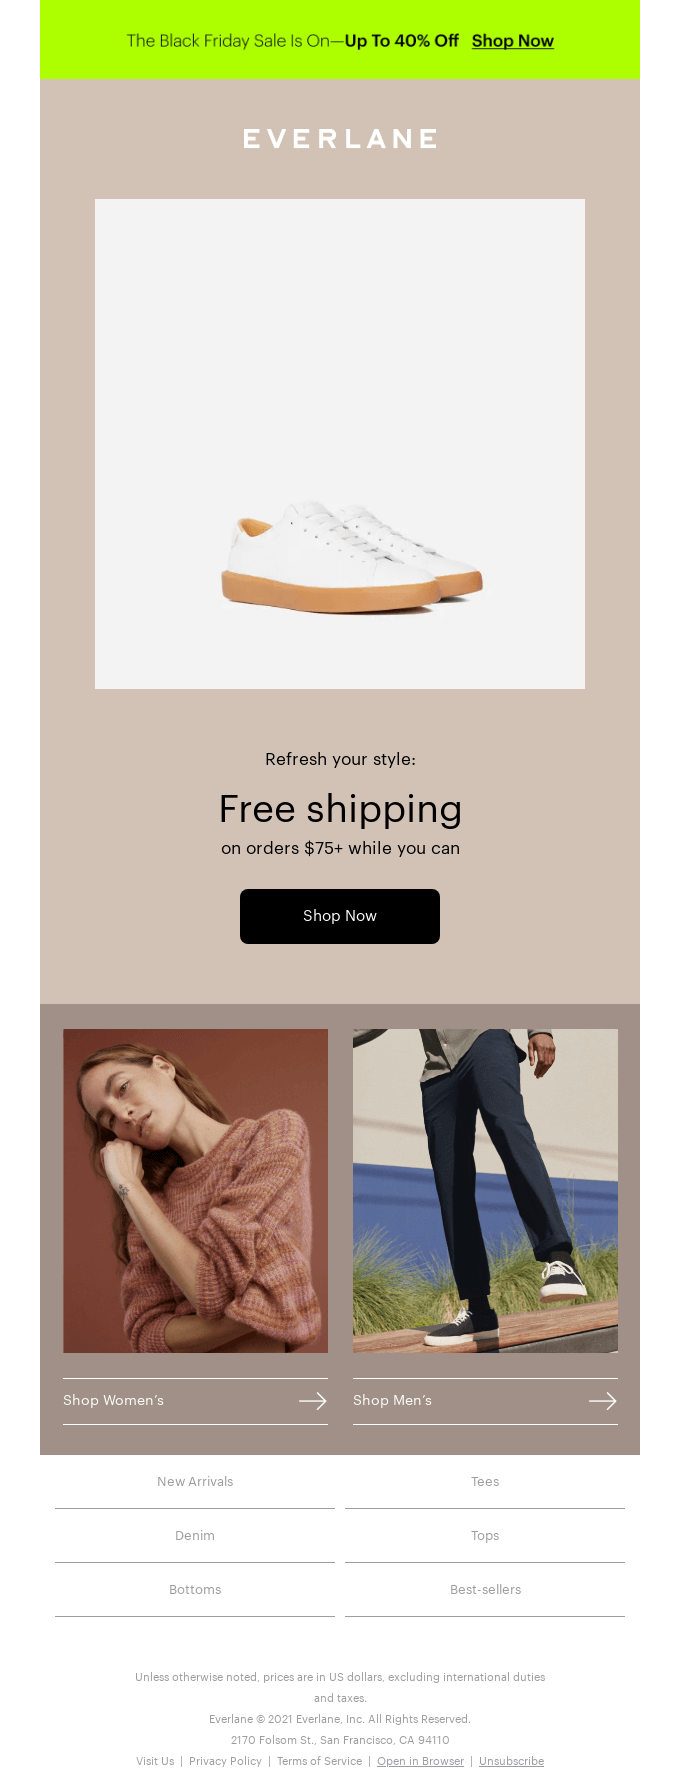 Free Shipping For Your Style Refresh